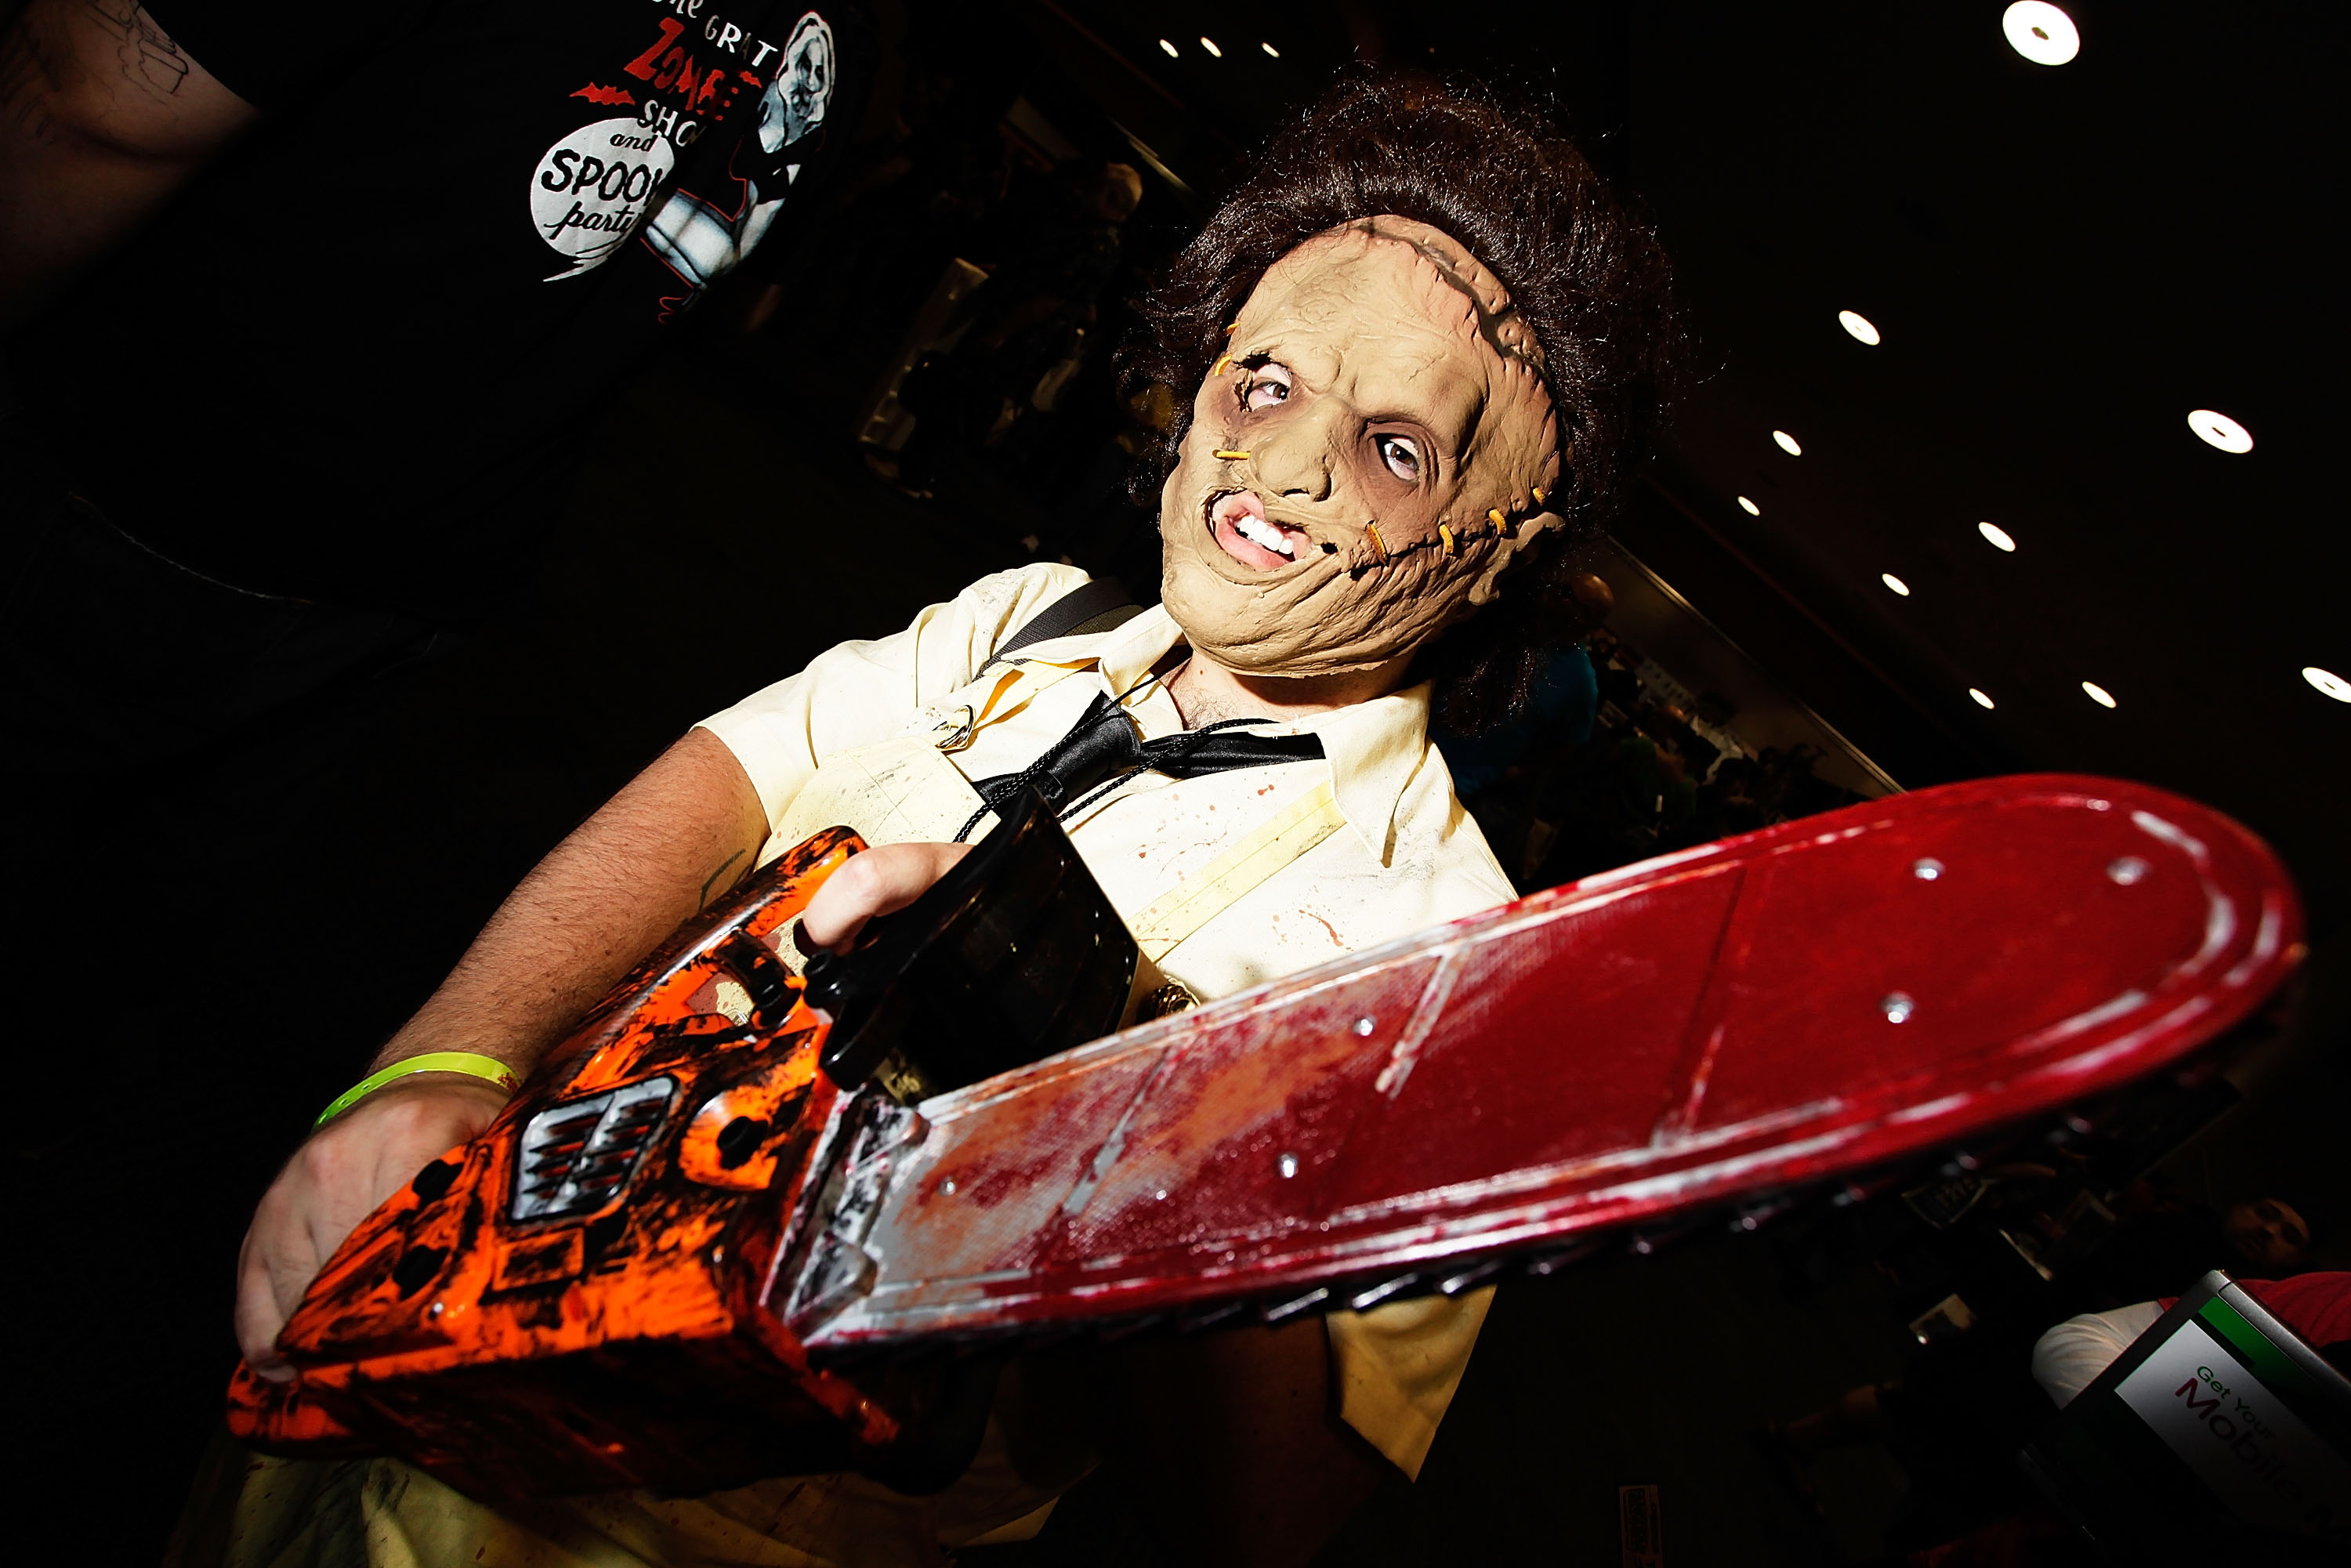 A Leatherface cosplayer with a chain saw